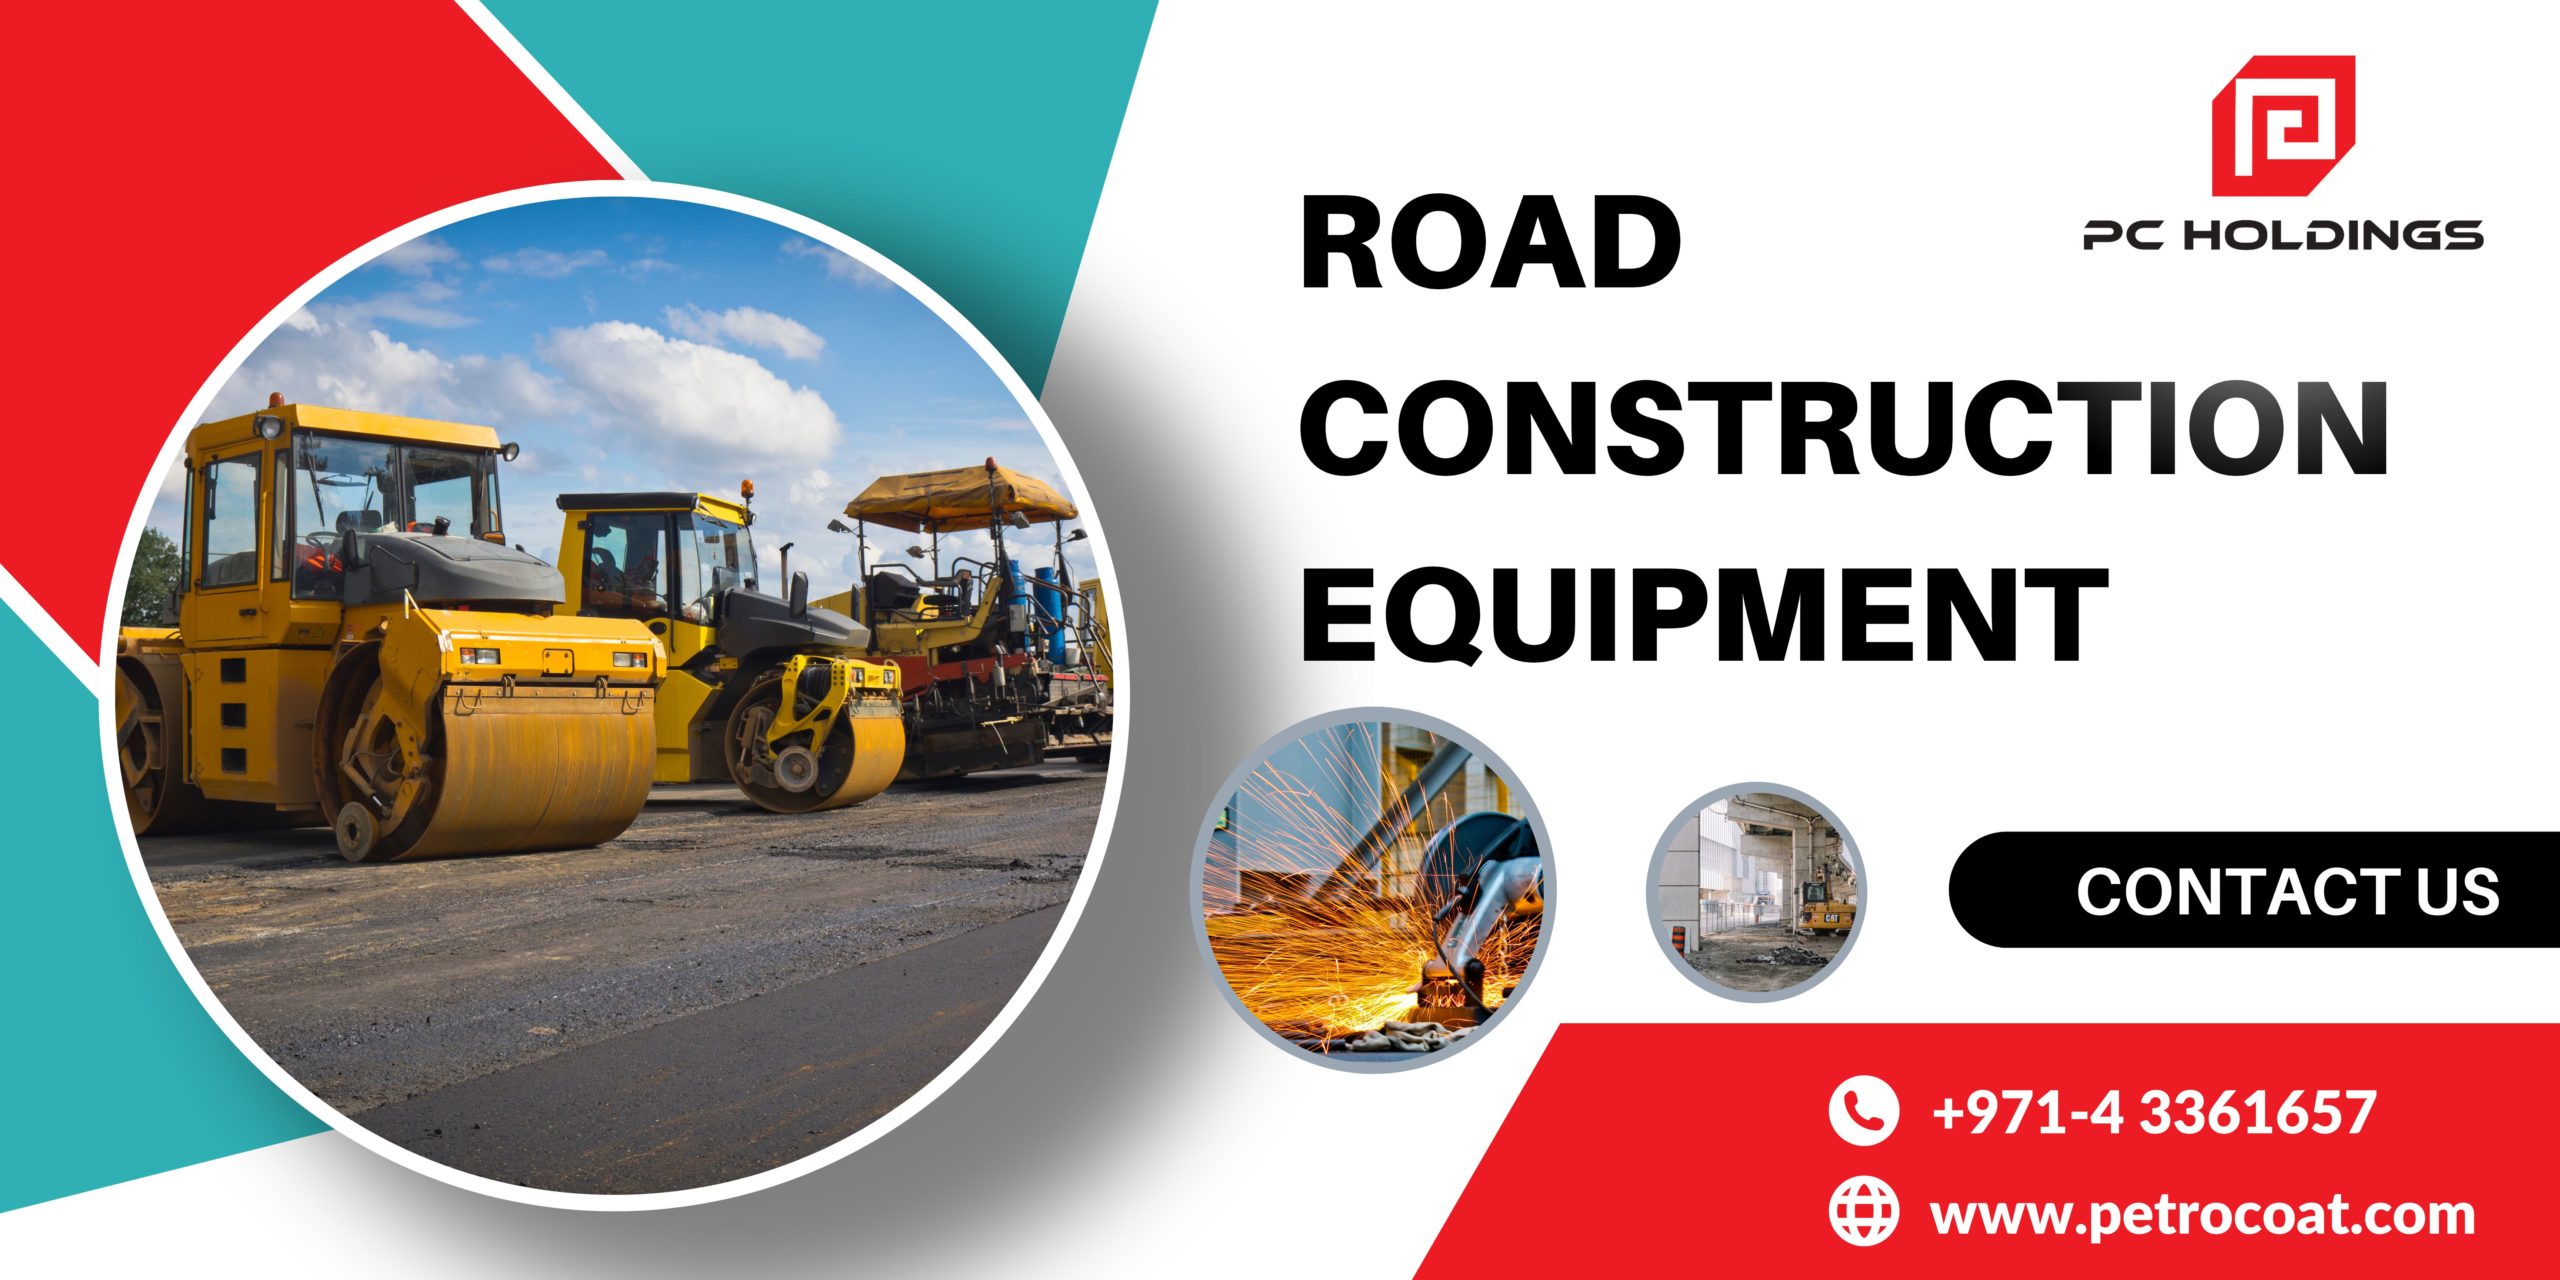 Road Construction Equipment - PC Holdings